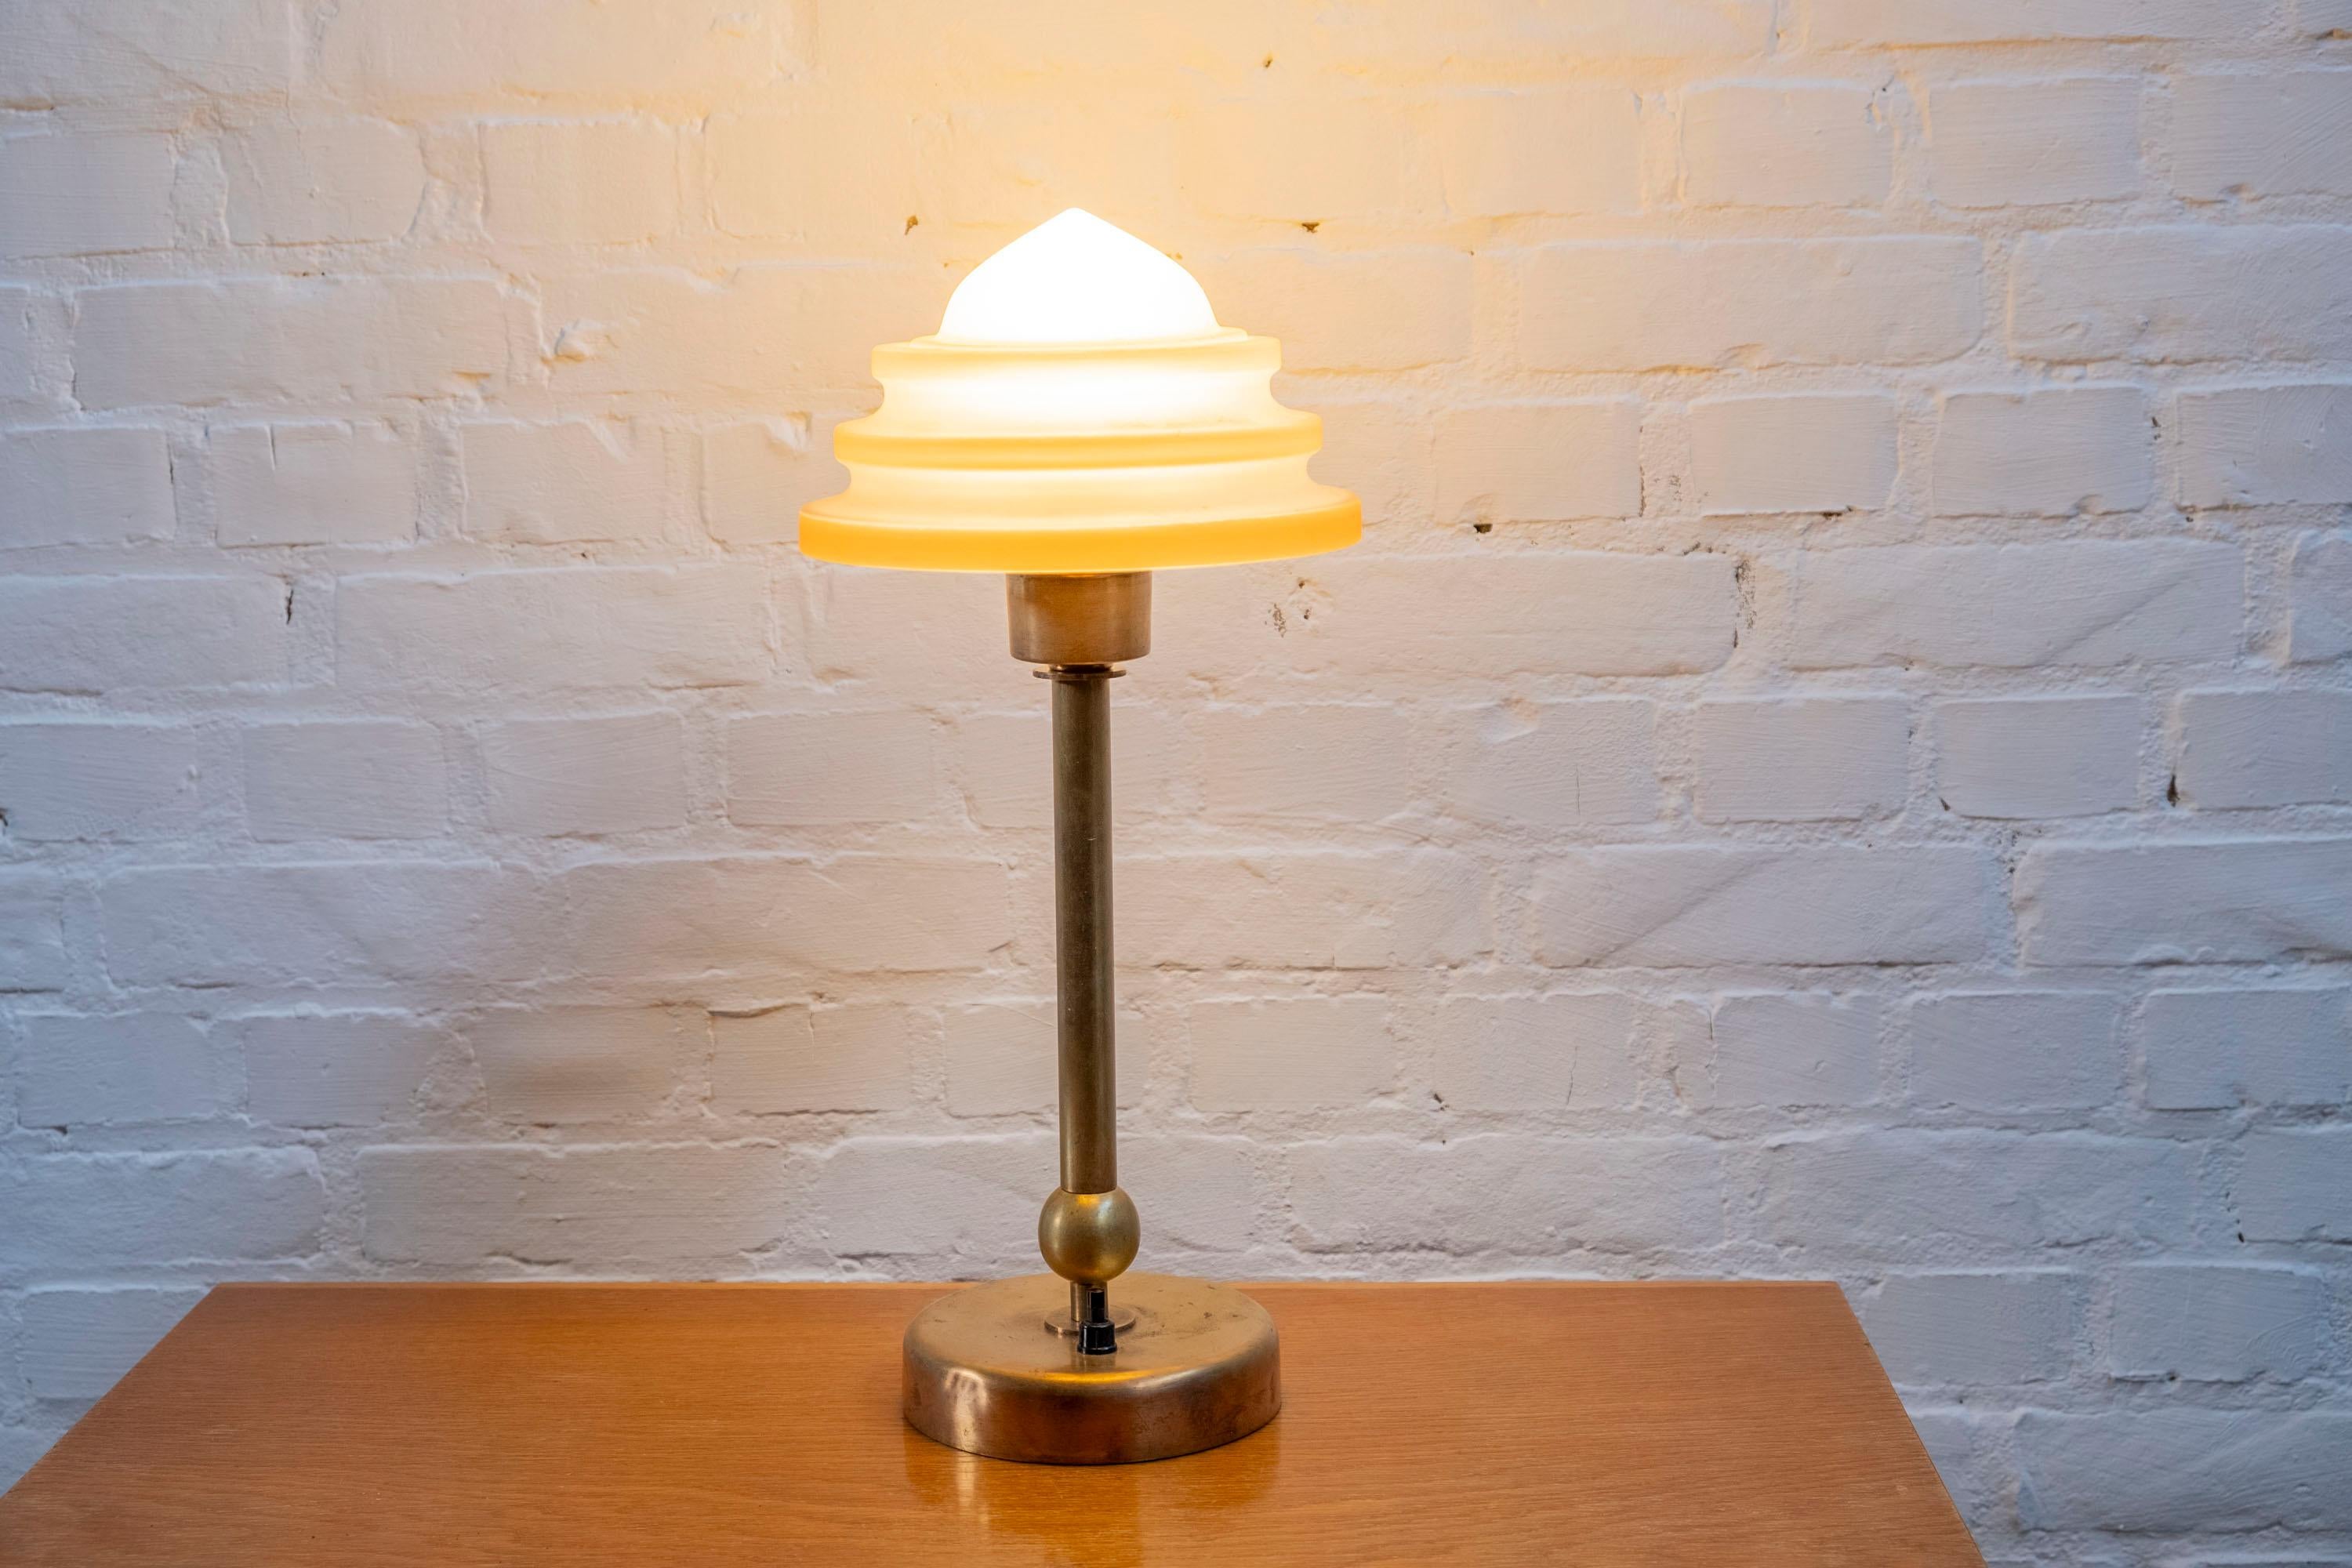 Art deco table lamp in brass and glass by Fog & Mørup from Denmark. The lamp features the rare variation of the so called 